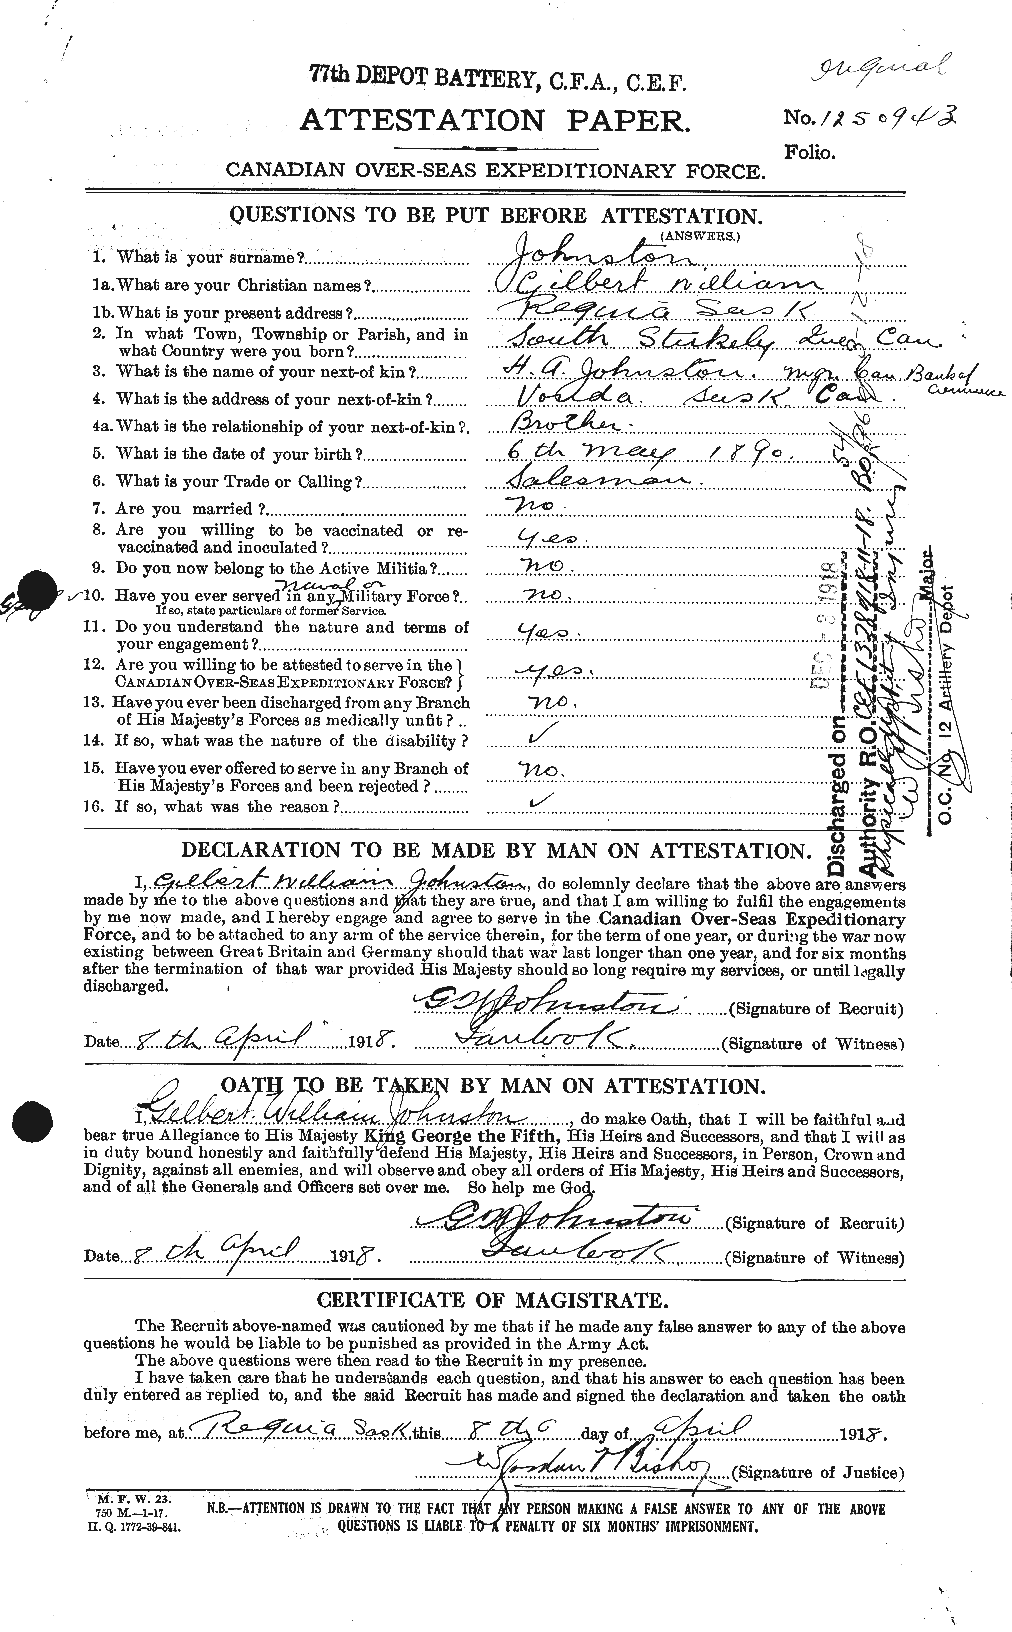 Personnel Records of the First World War - CEF 419463a